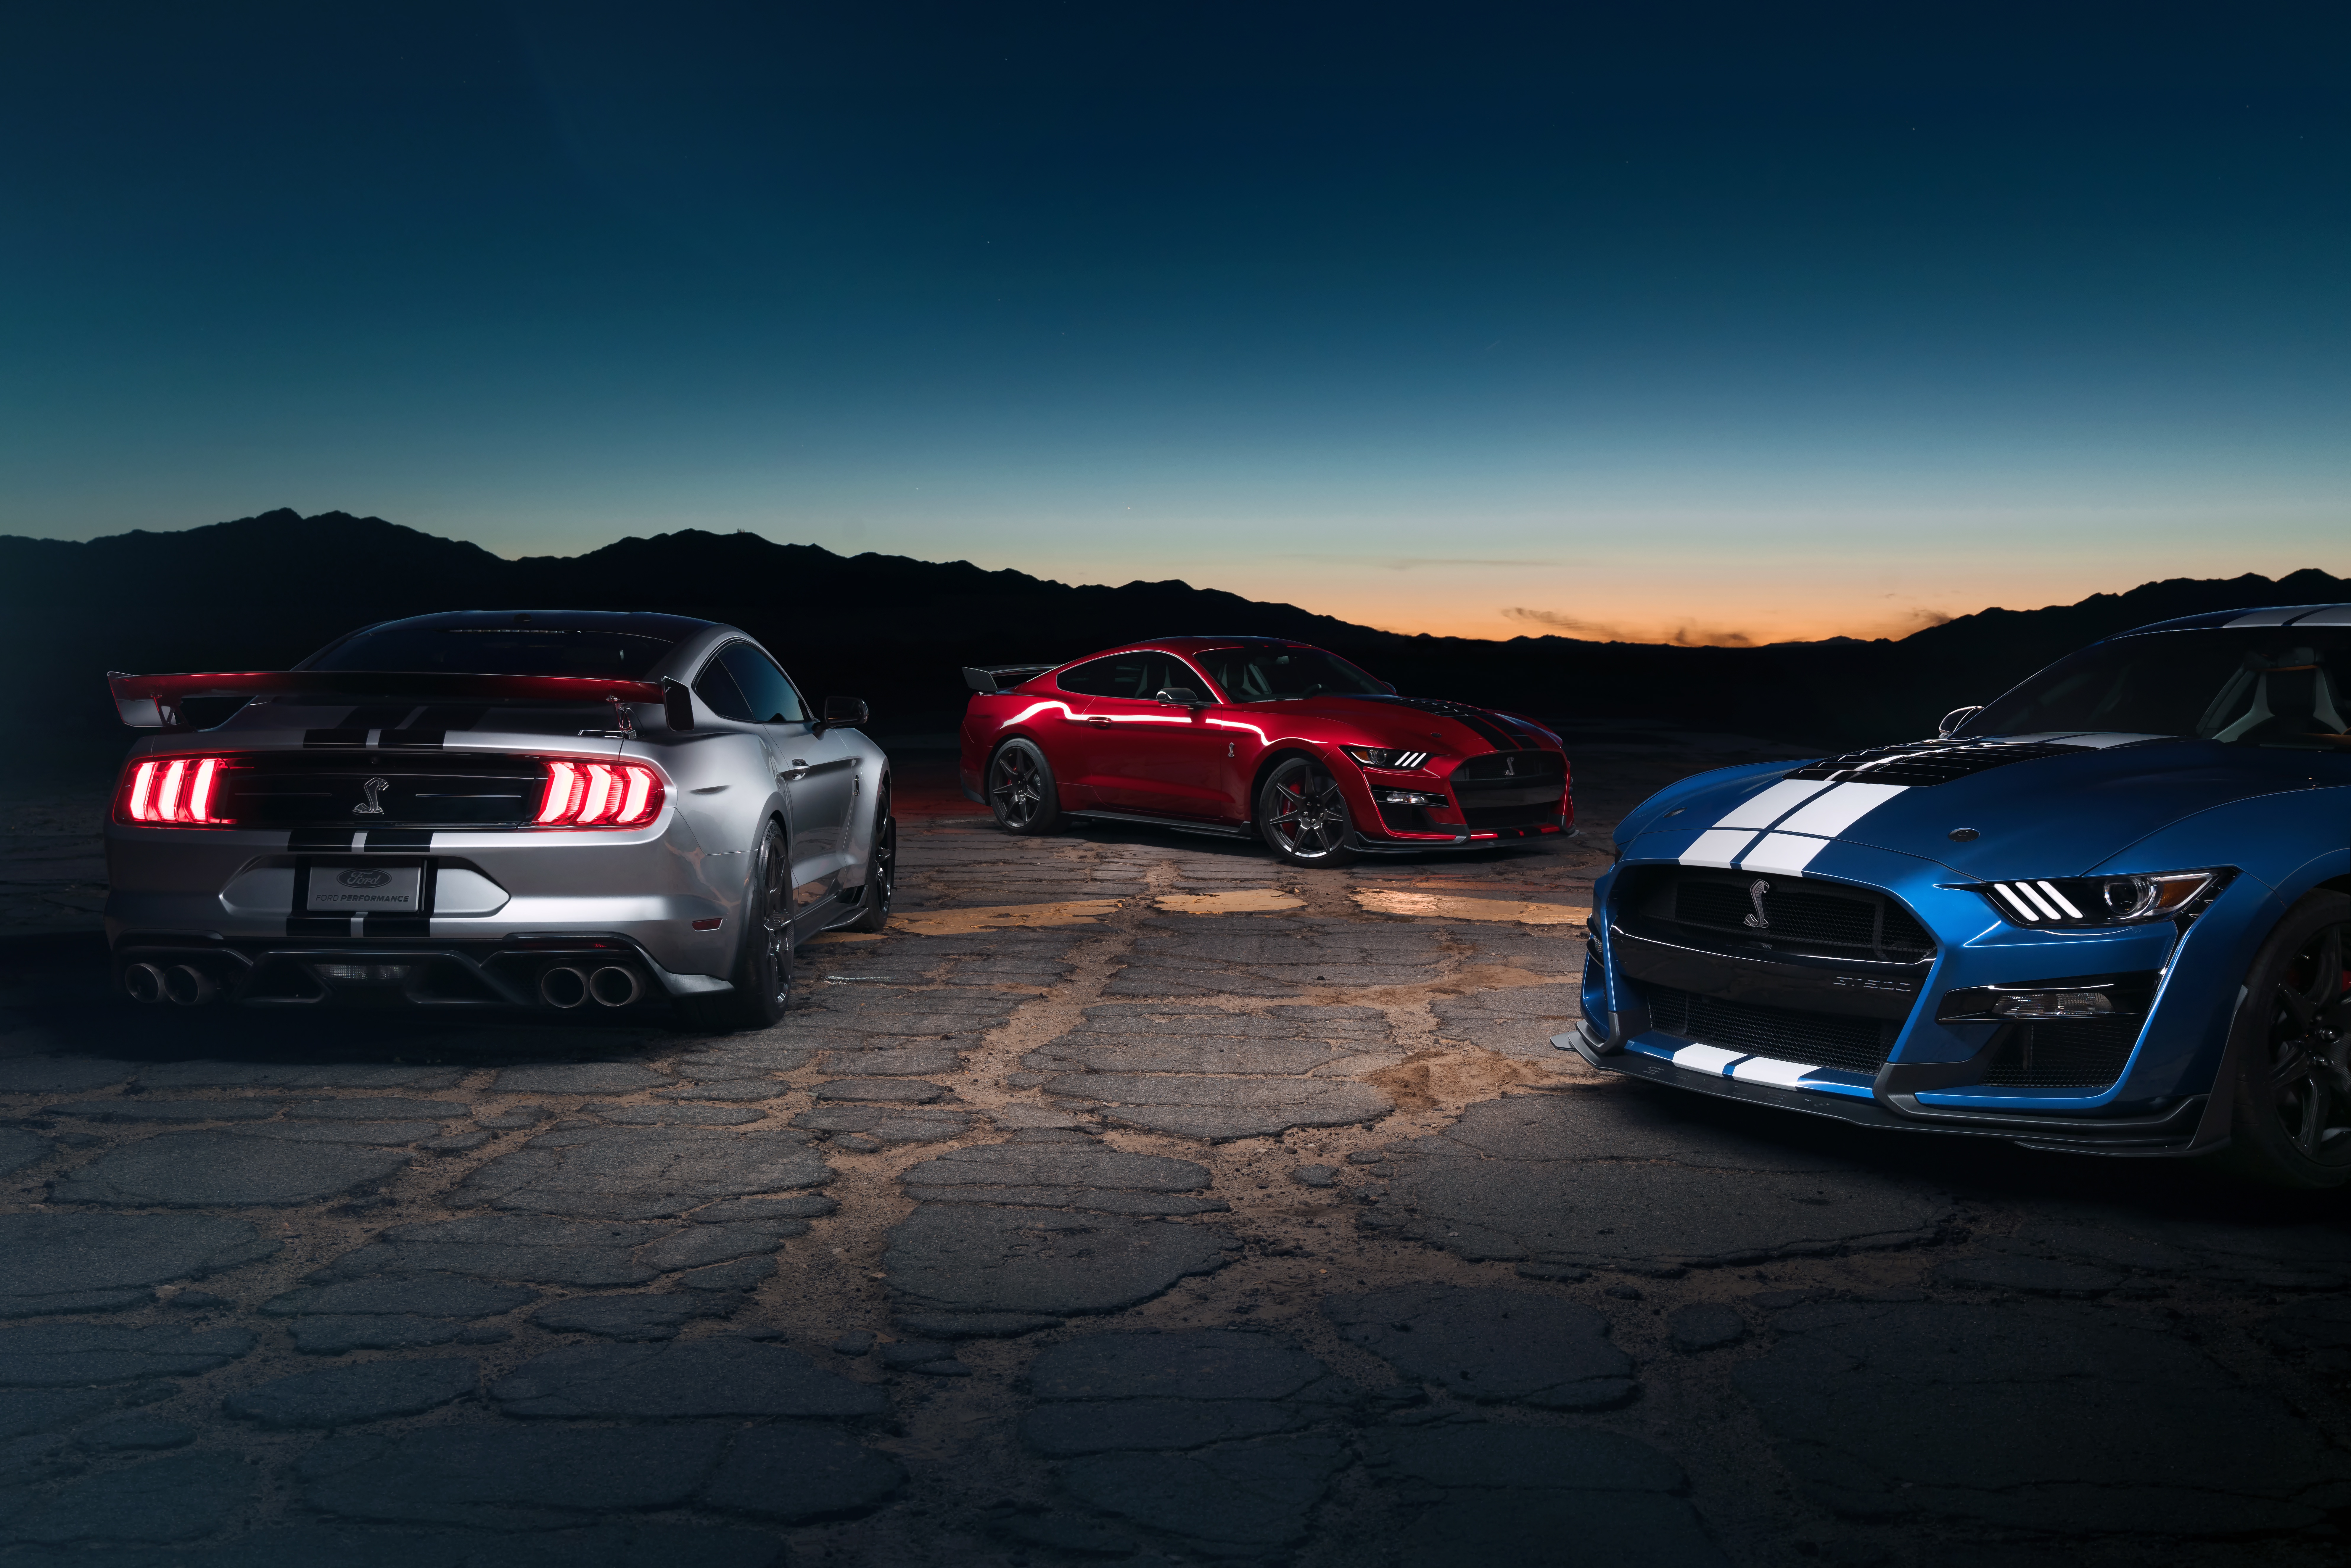 Blue Car Car Ford Ford Mustang Ford Mustang Shelby Gt500 Muscle Car Red Car Silver Car Vehicle 7943x5298